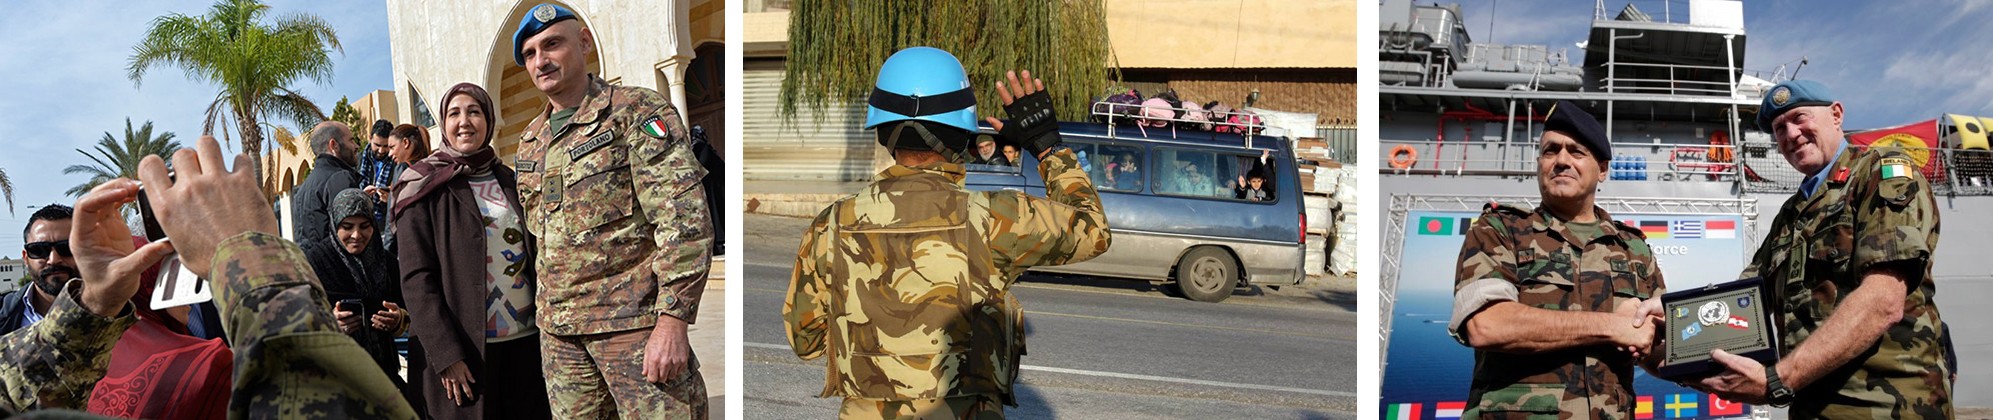 UNIFIL Soldiers